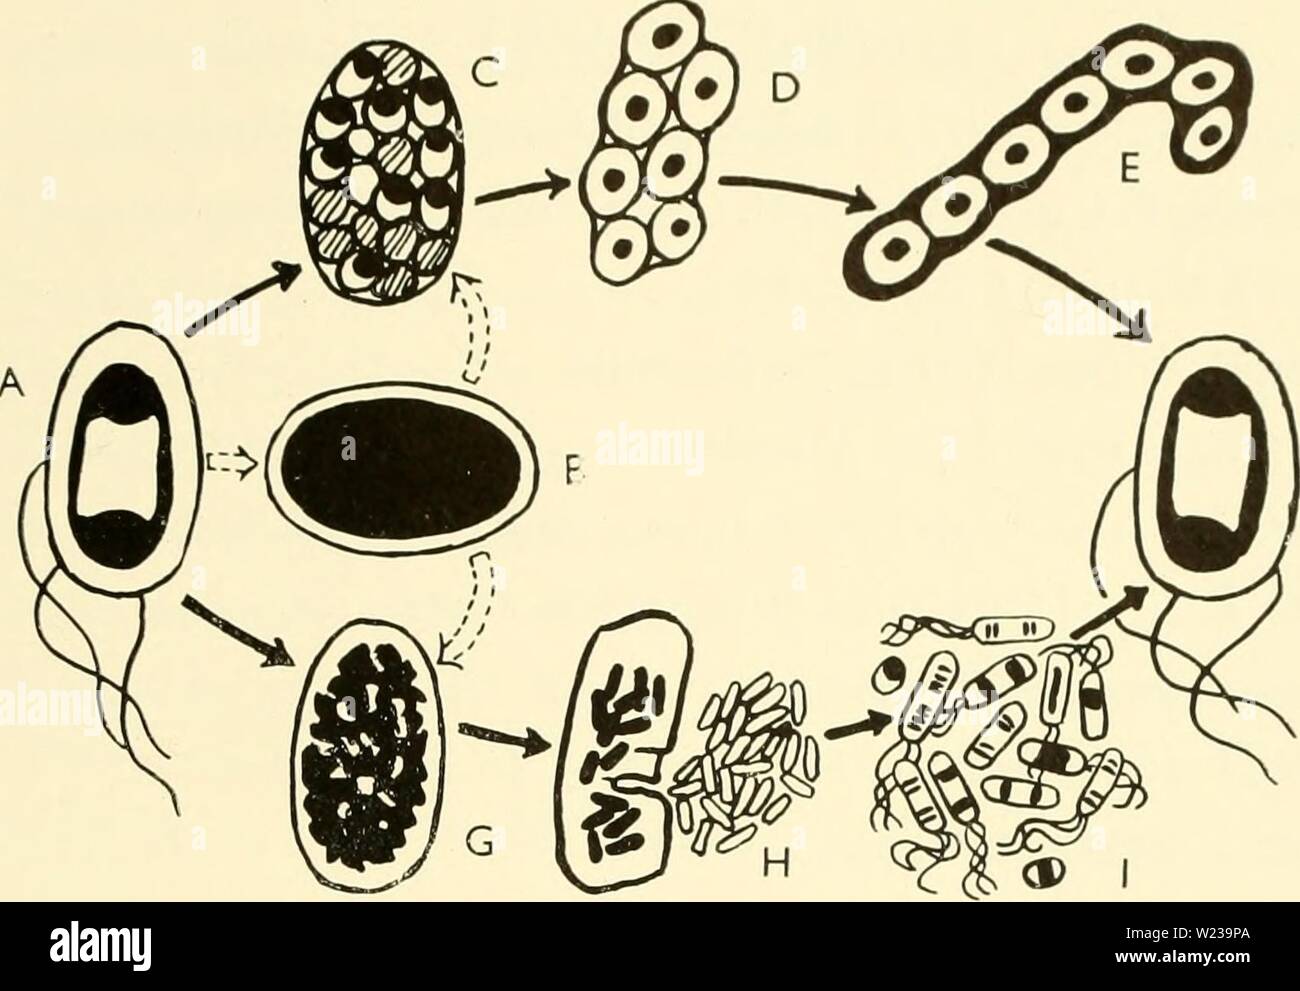 Archive image from page 146 of The cytology and life-history of. The cytology and life-history of bacteria  cytologylifehist00biss Year: 1955  LIFE-CYCLES IN BACTERIA 131    Fig. 58 LIFE-CYCLE OF AZOTOBACTER An extraordinary degree of complexity is found in the life-cycle of the nitrogen-fixing bacterium Azotobacter. Not only does this organism produce spore-like cysts (not illustrated here), but two distinctly different types of gonidia. The vegetativ'e cell [A] becomes packed with tiny replicas of itself (C), or with motile gonidia (G, H). In both cases, the cycle is initiated by the product Stock Photo